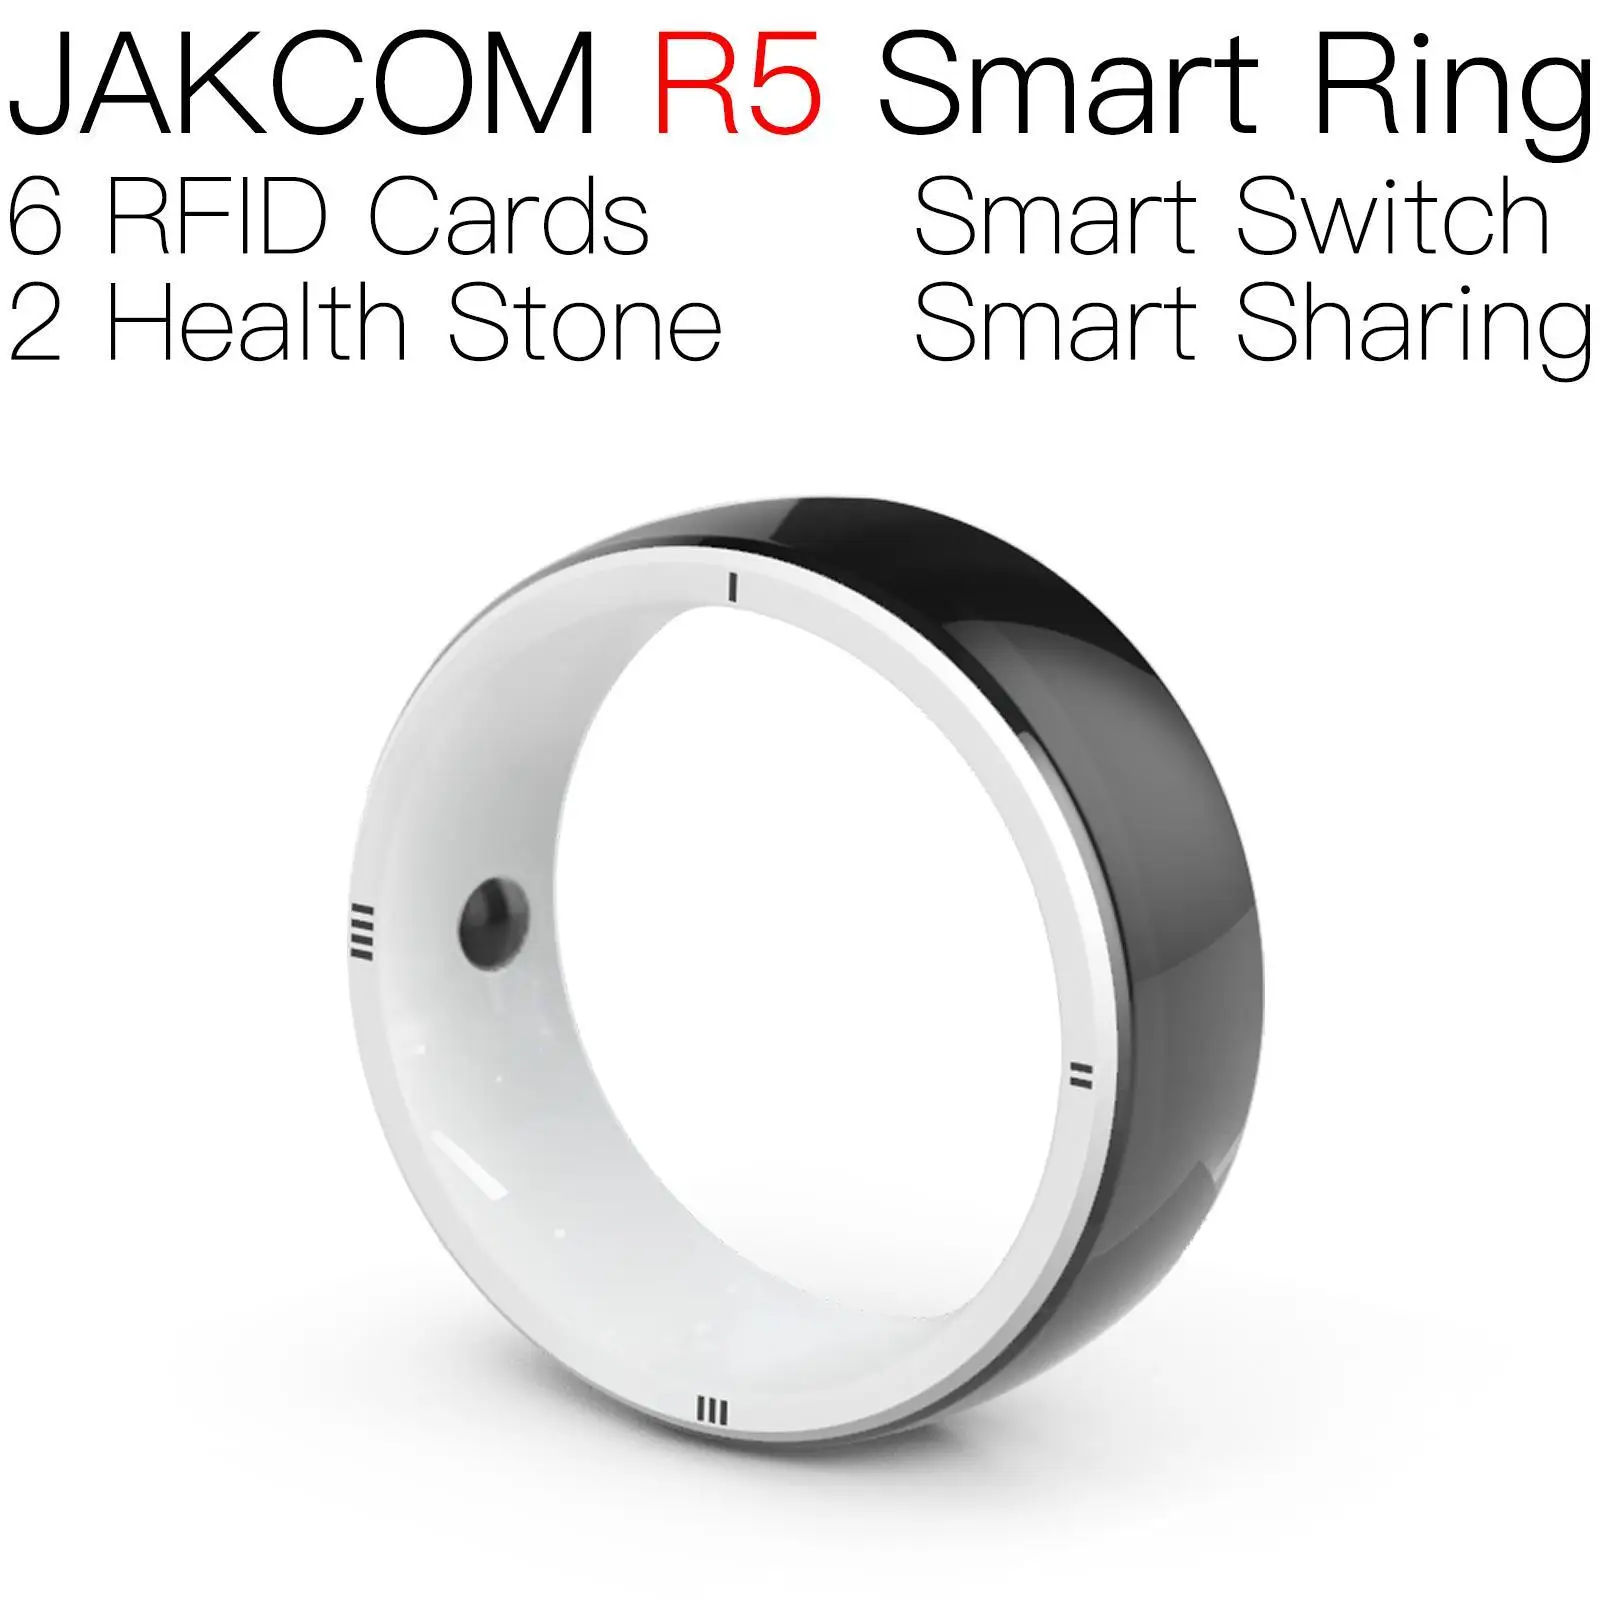 

JAKCOM R5 Smart Ring New product as dual frequency hf uhf nfc classic 1k s50 and h3 smart card for payment clone fdx b tag